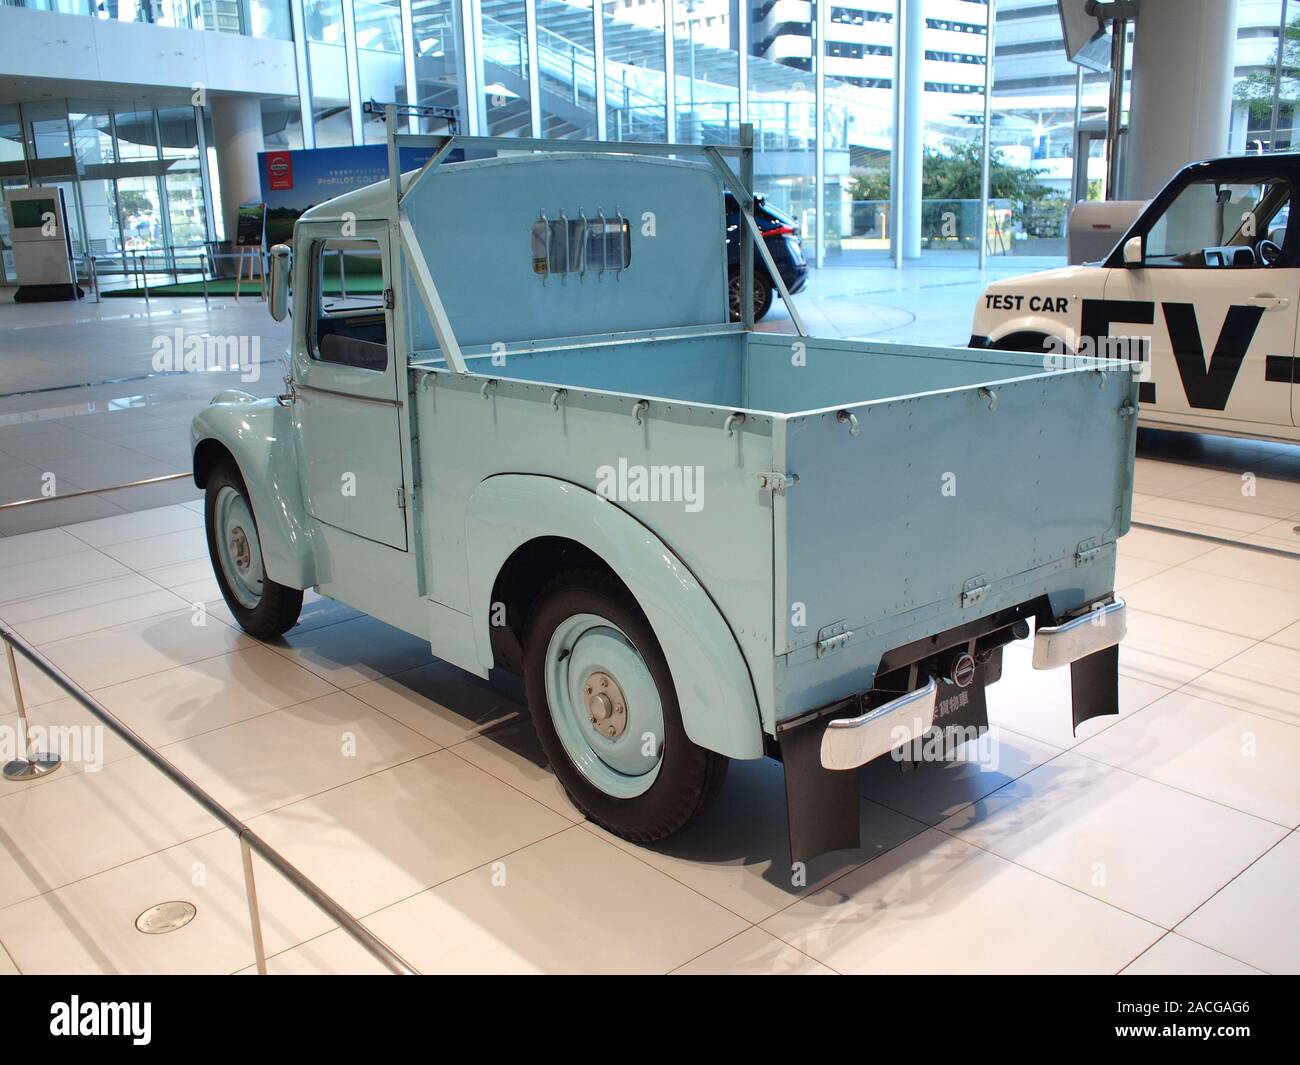 1947 Nissan TAMA Pickup Truck at the Nissan Global Headquarters Gallery Stock Photo